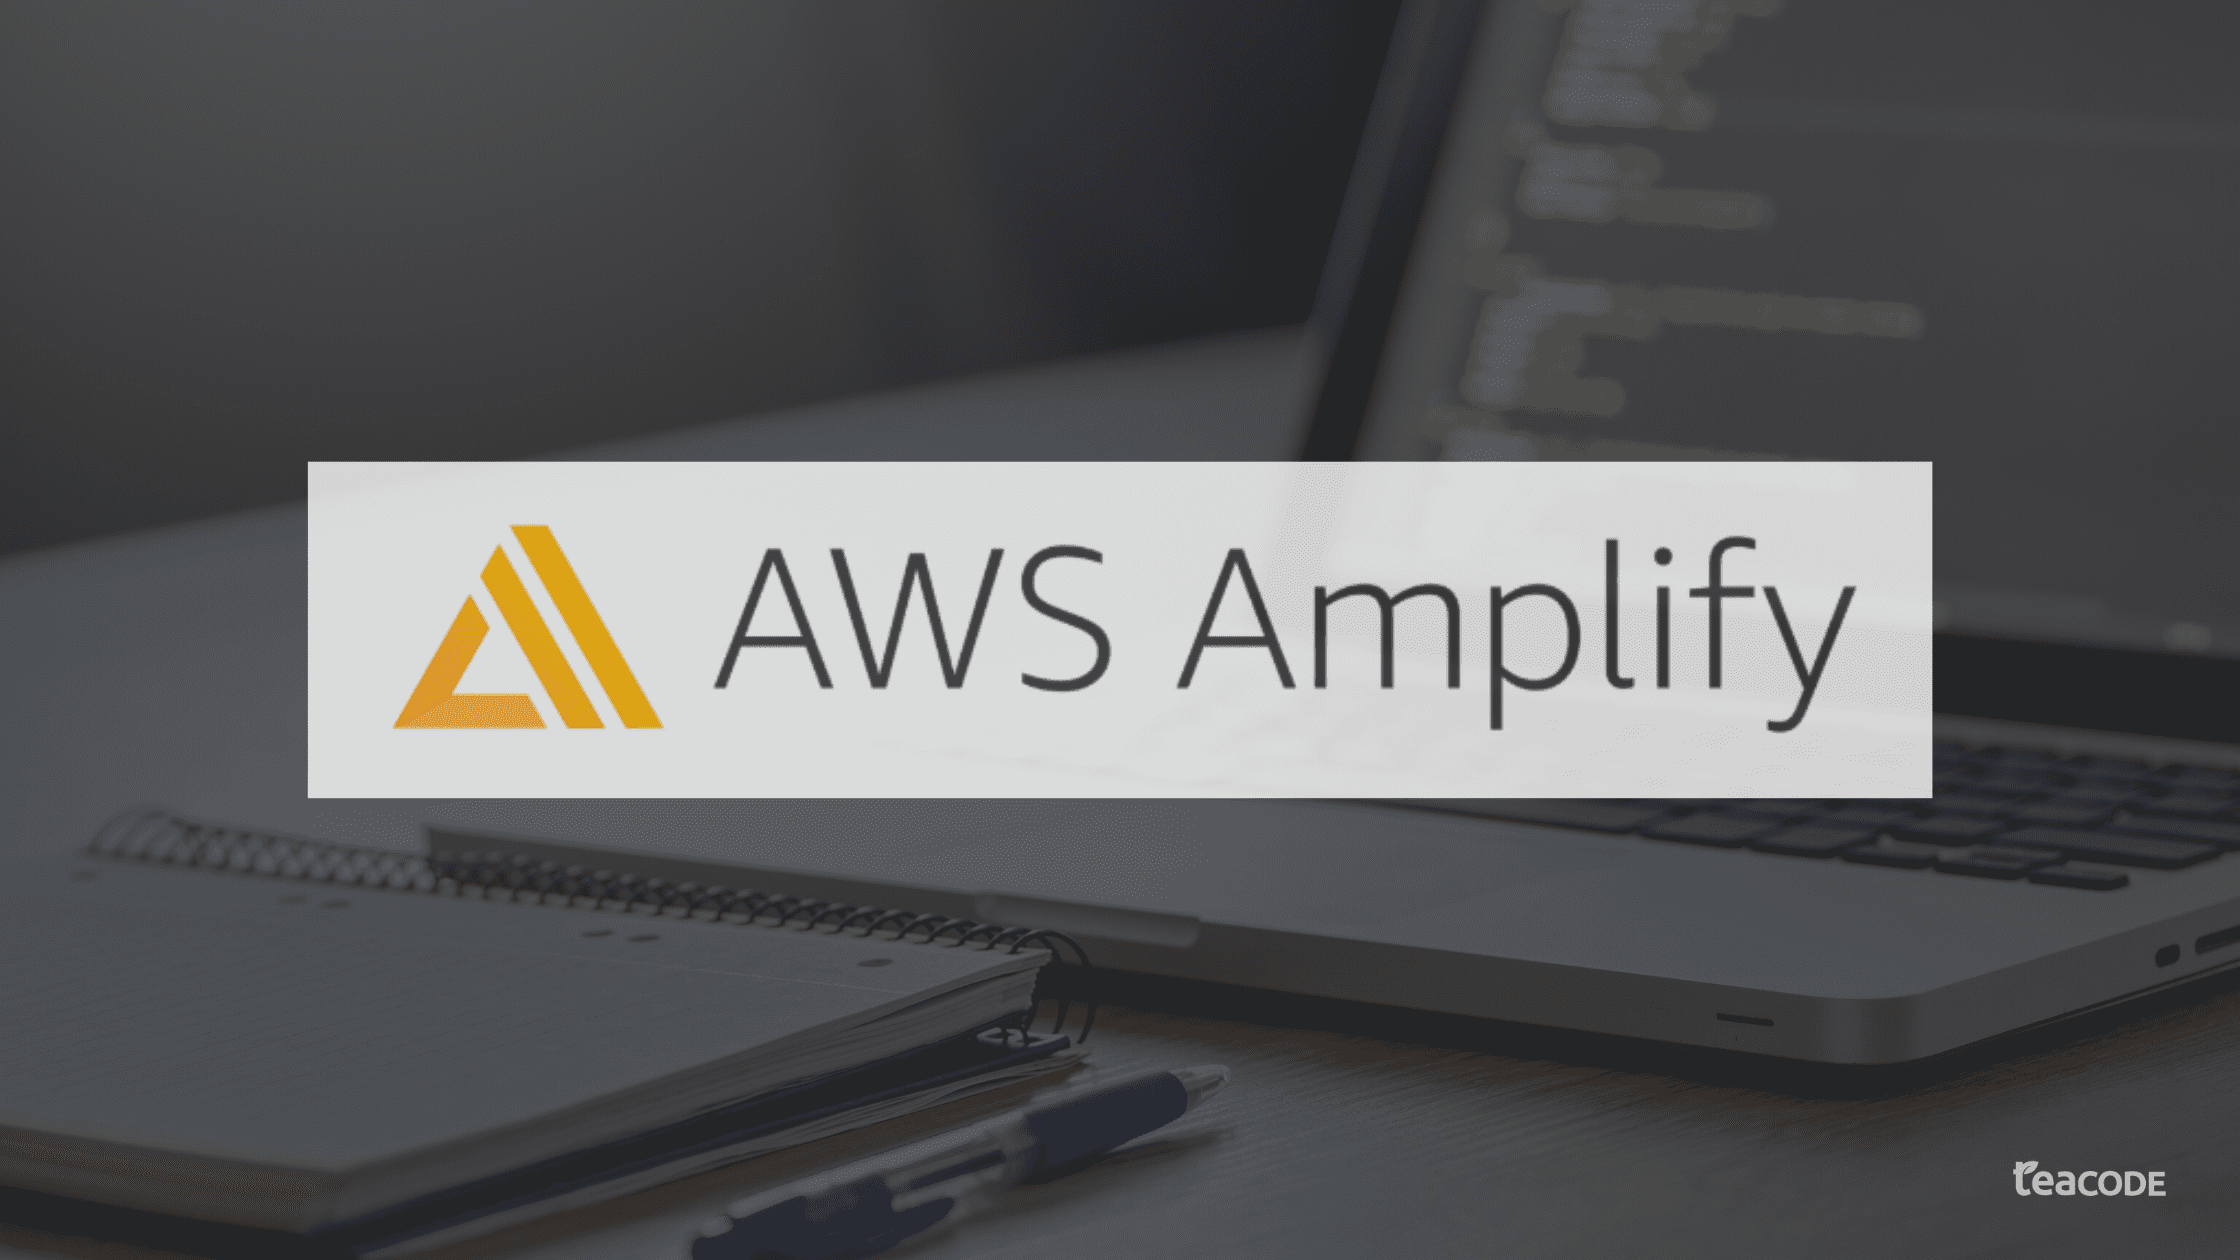 AWS Amplify – Is It Really Worth Using It As a Production Solution?